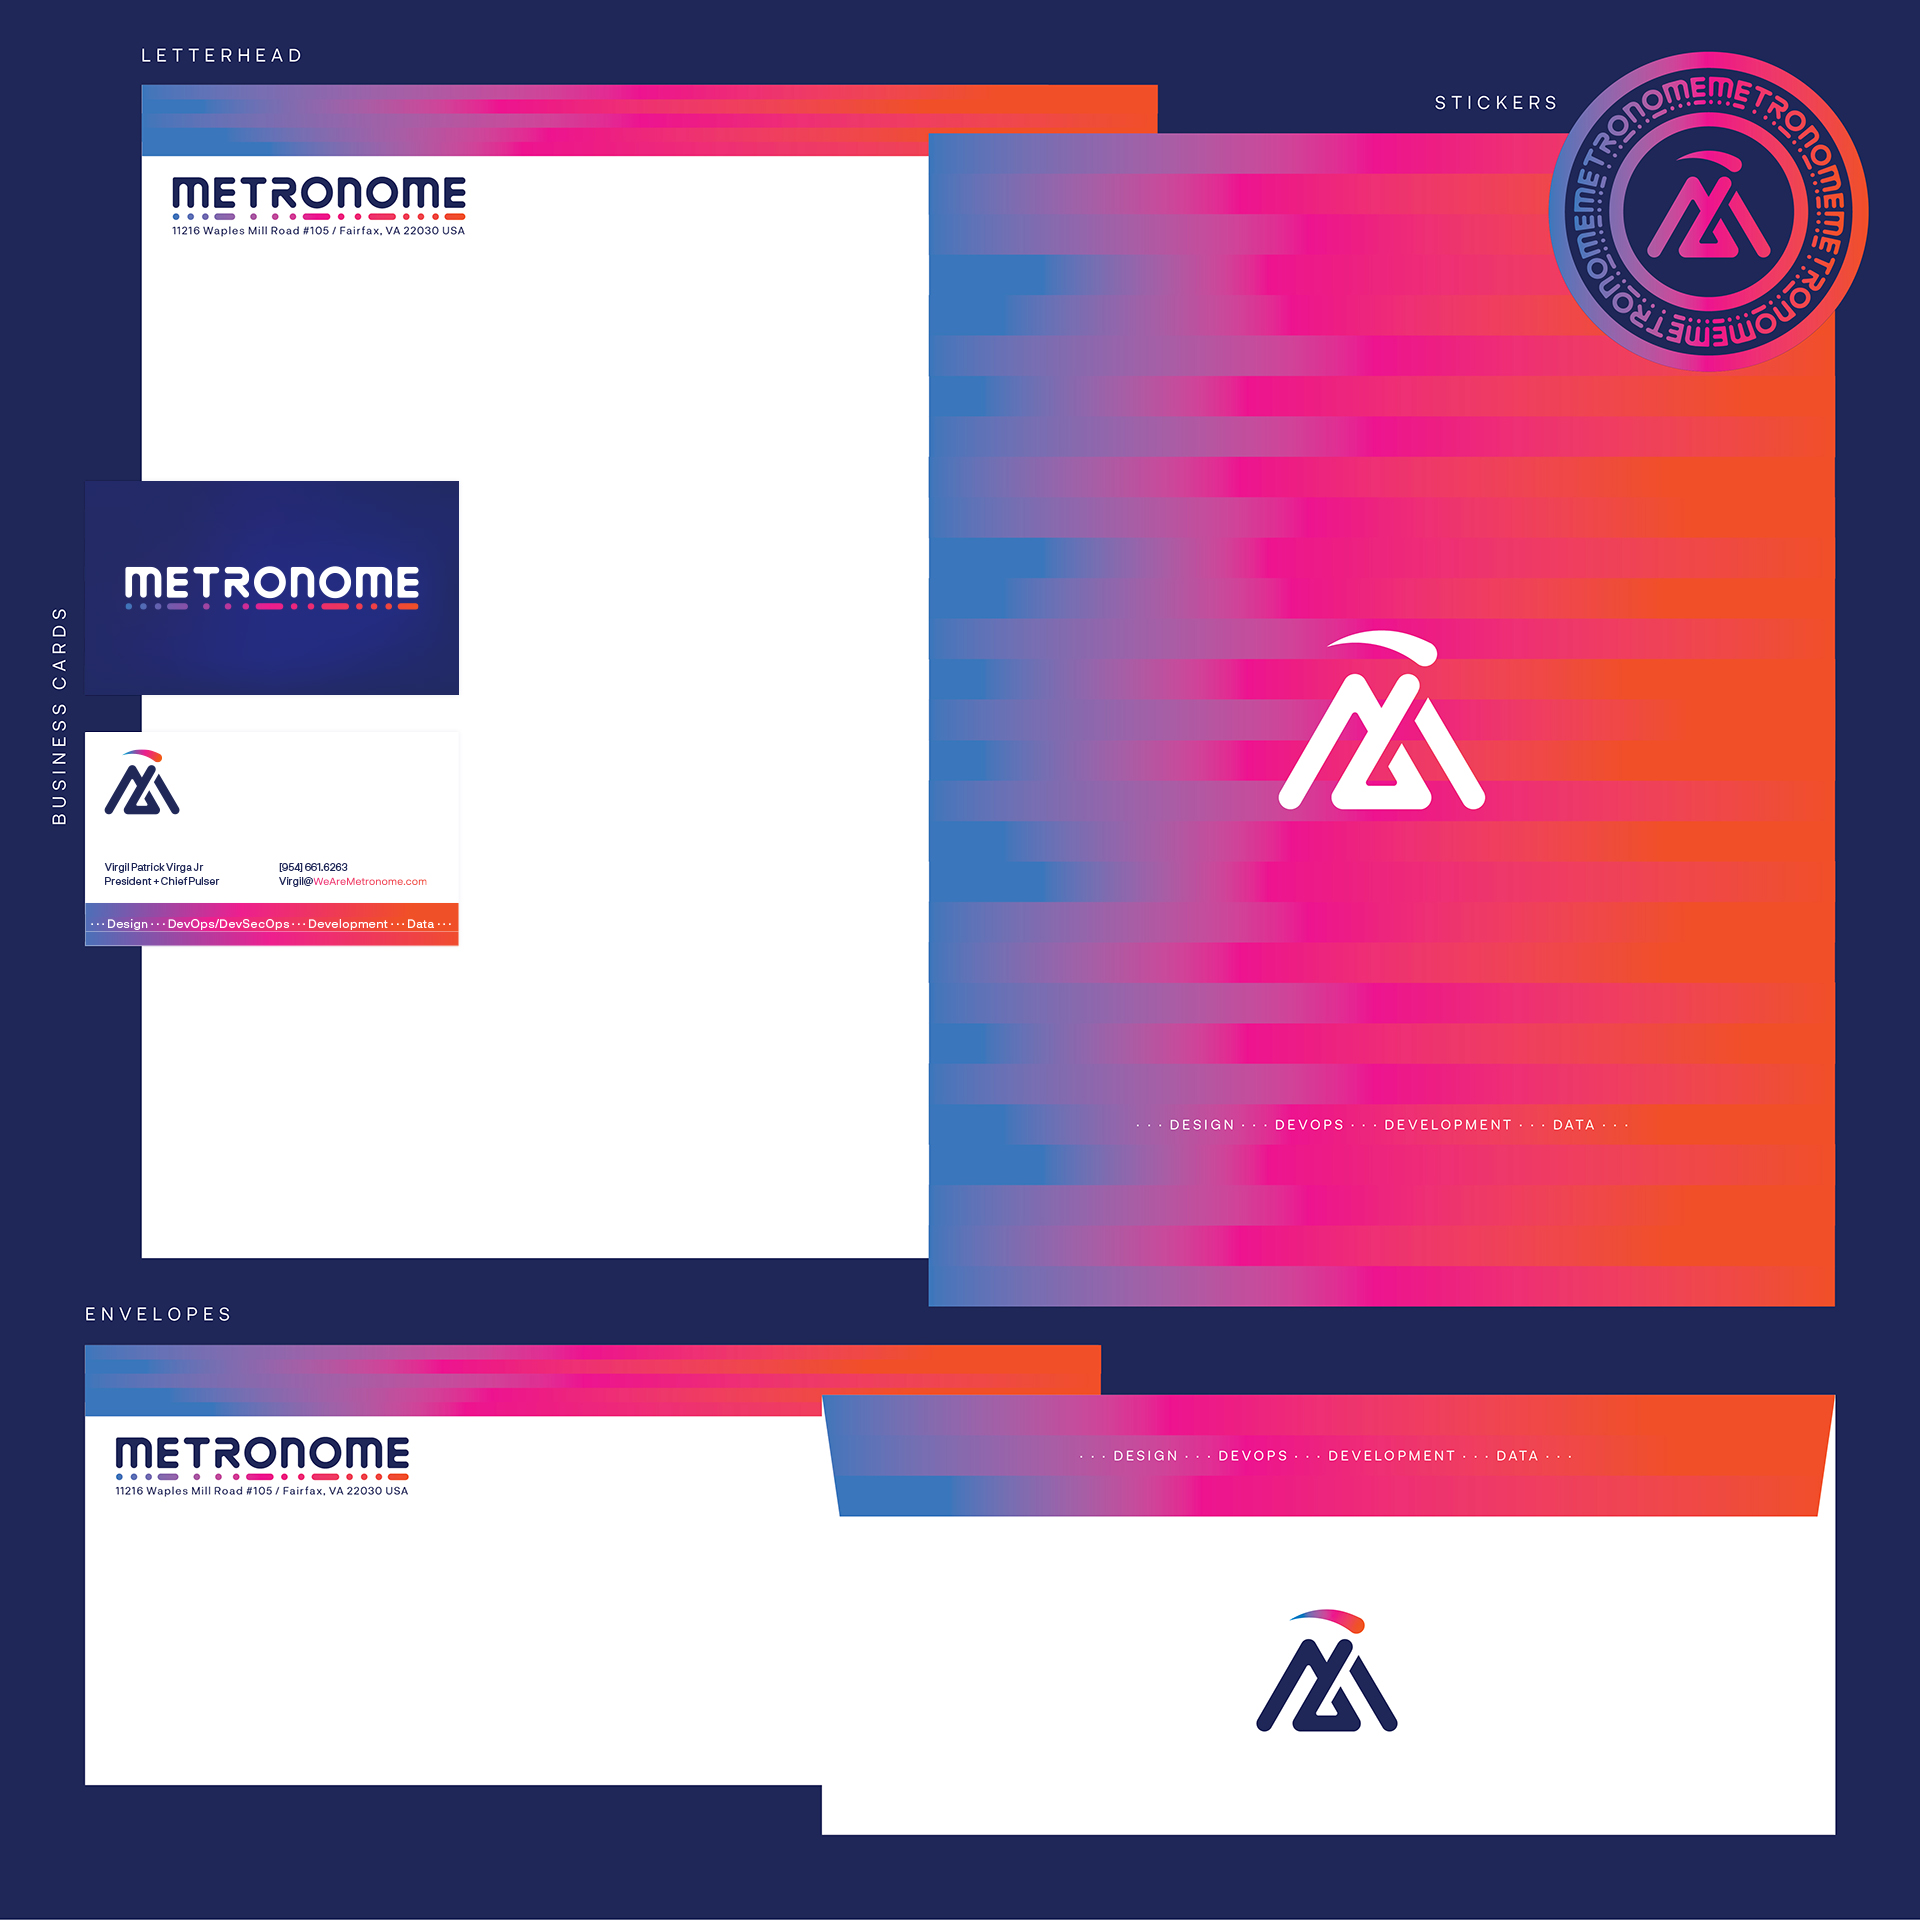 Metronome Identity Package